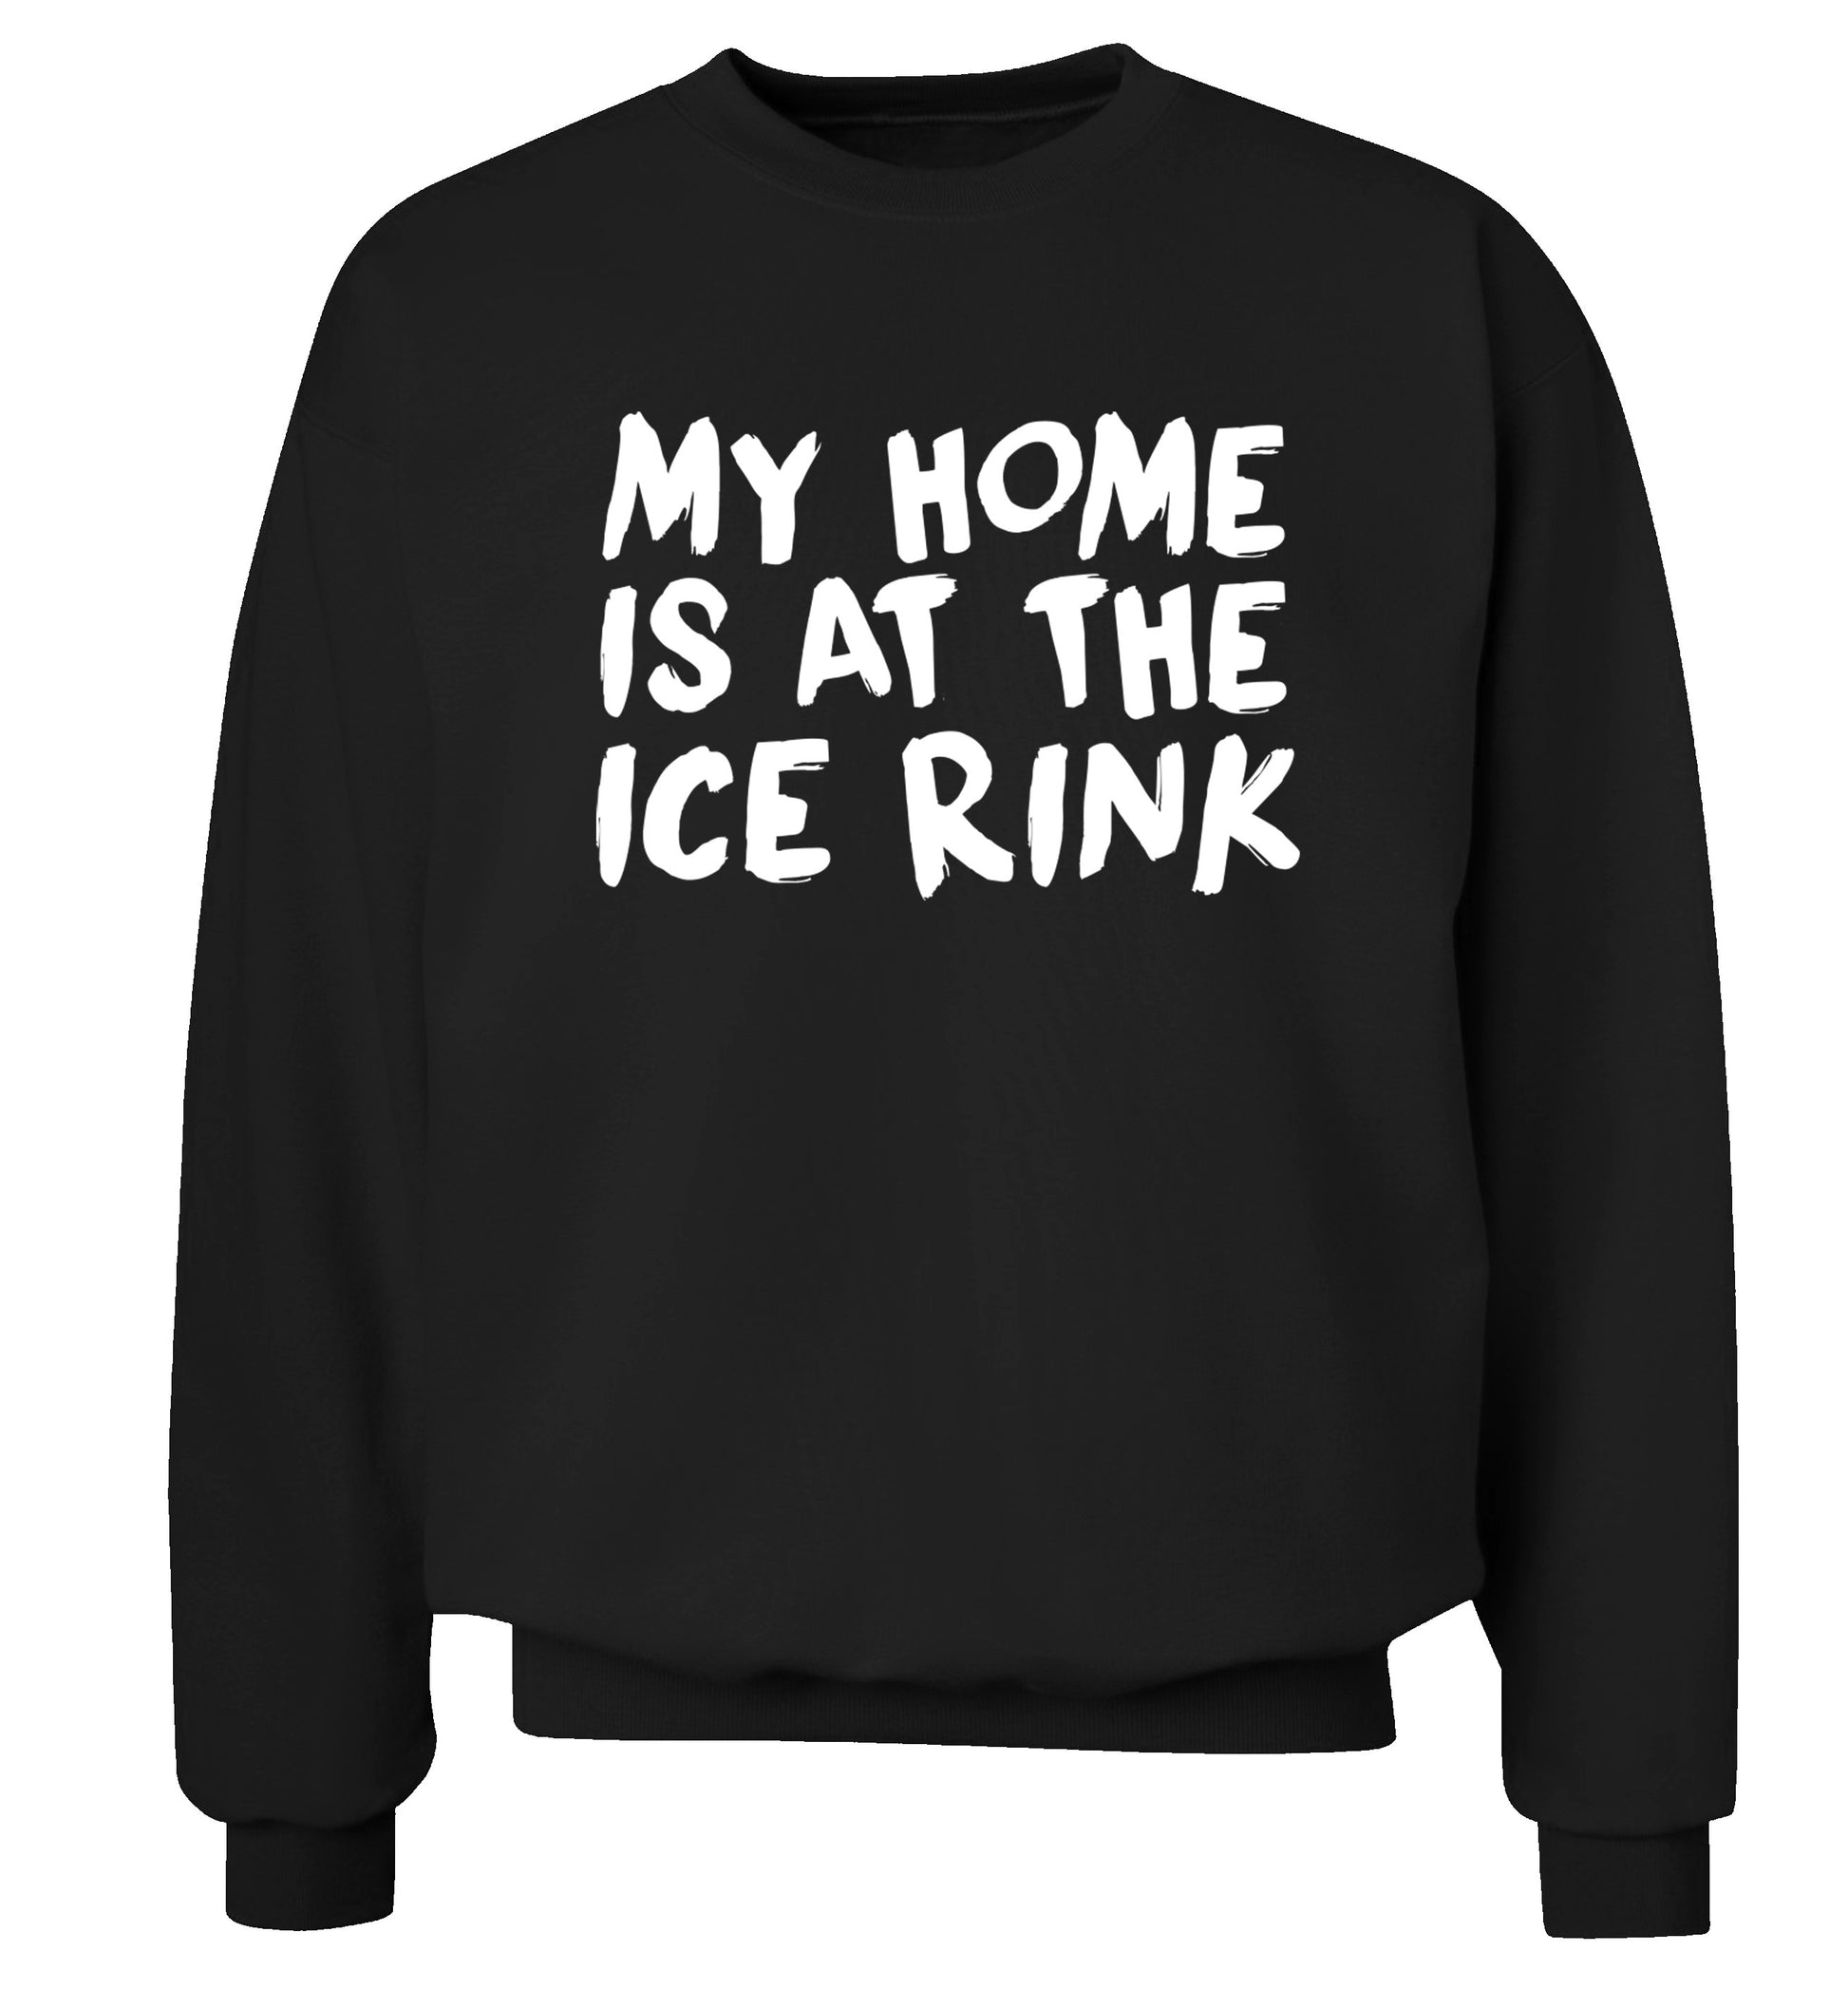 My home is at the ice rink Adult's unisex black Sweater 2XL